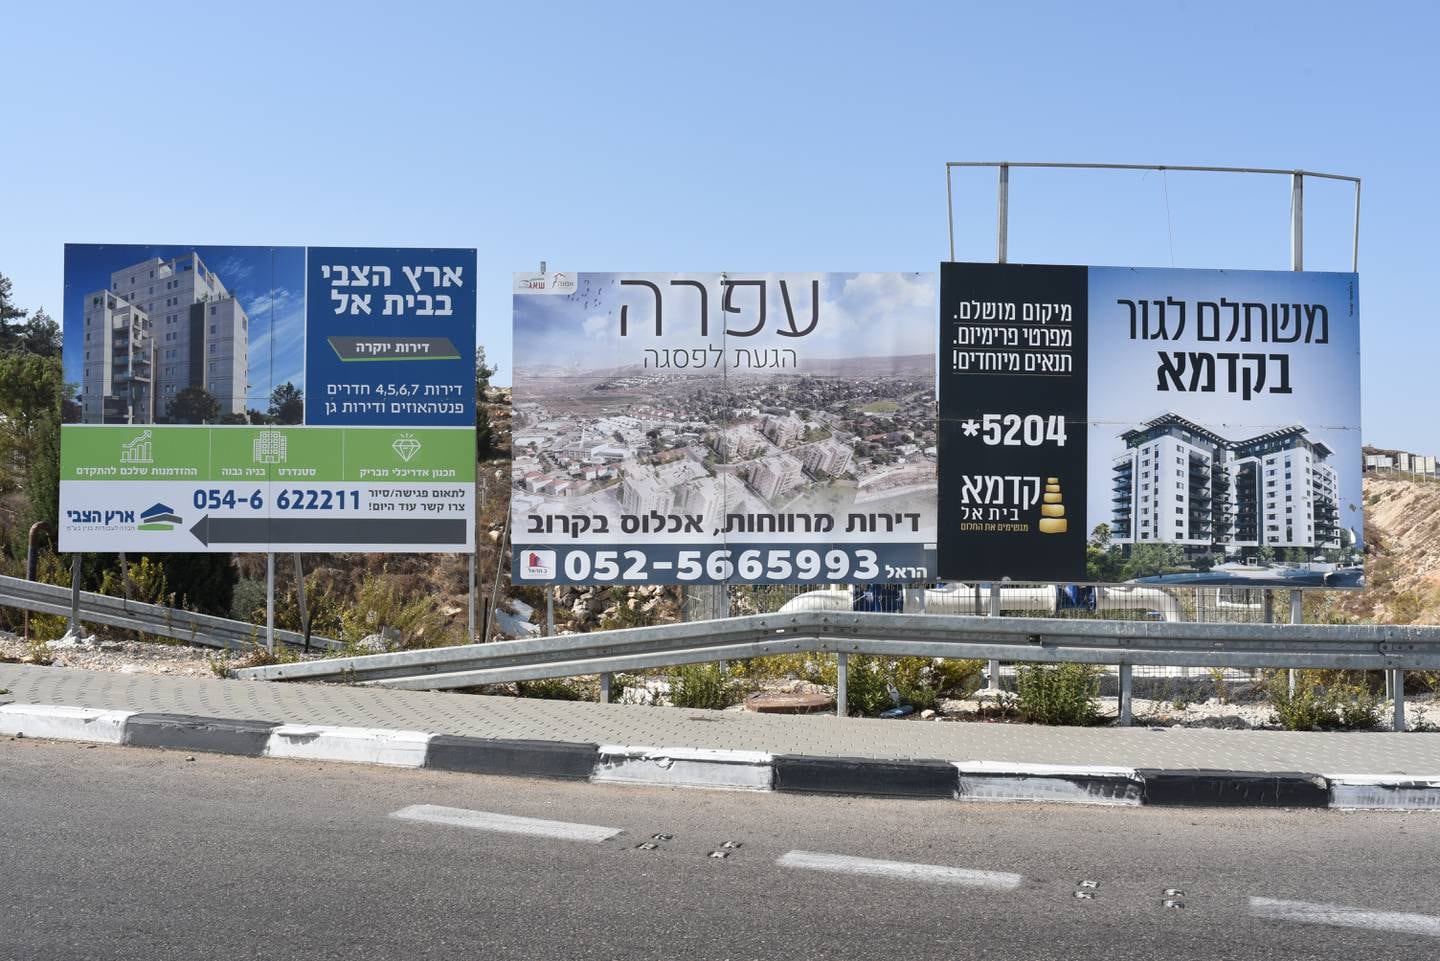 Hebrew-language billboards advertising homes in Israeli settlements, on the edge of Ramallah in the West Bank. Rosie Scammell / The National